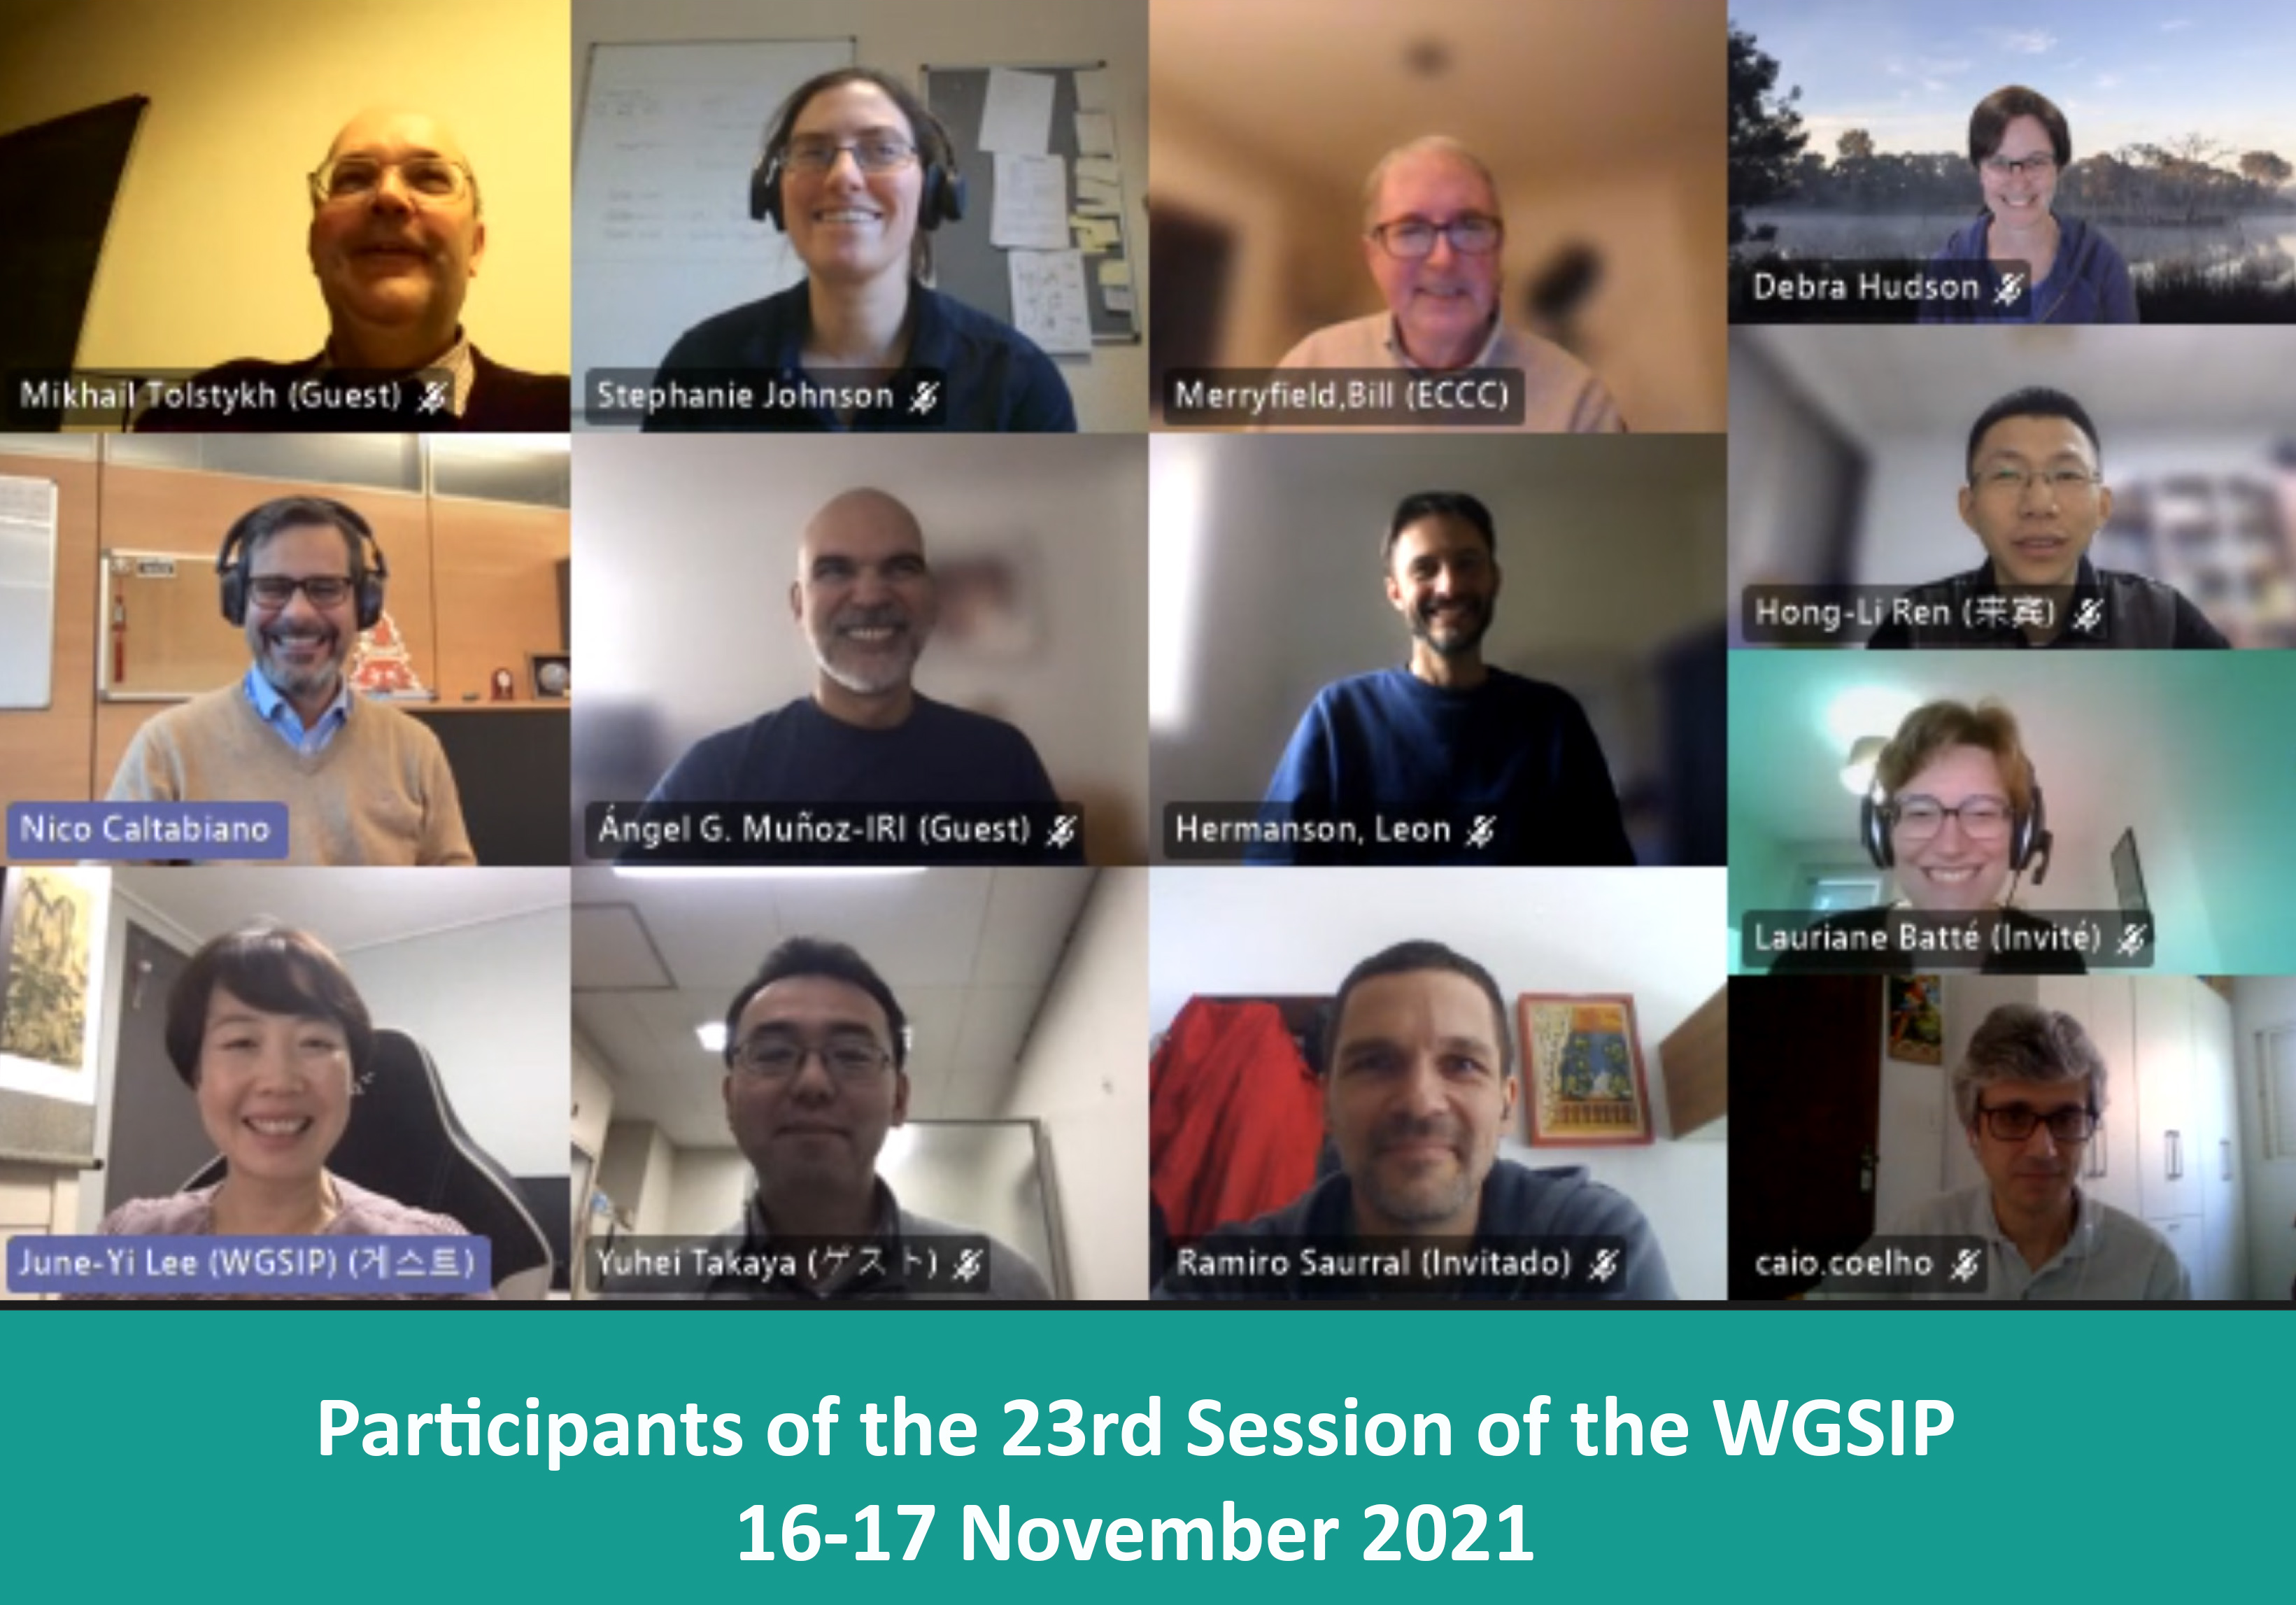 Participants to the 23rd session of the WGSIP